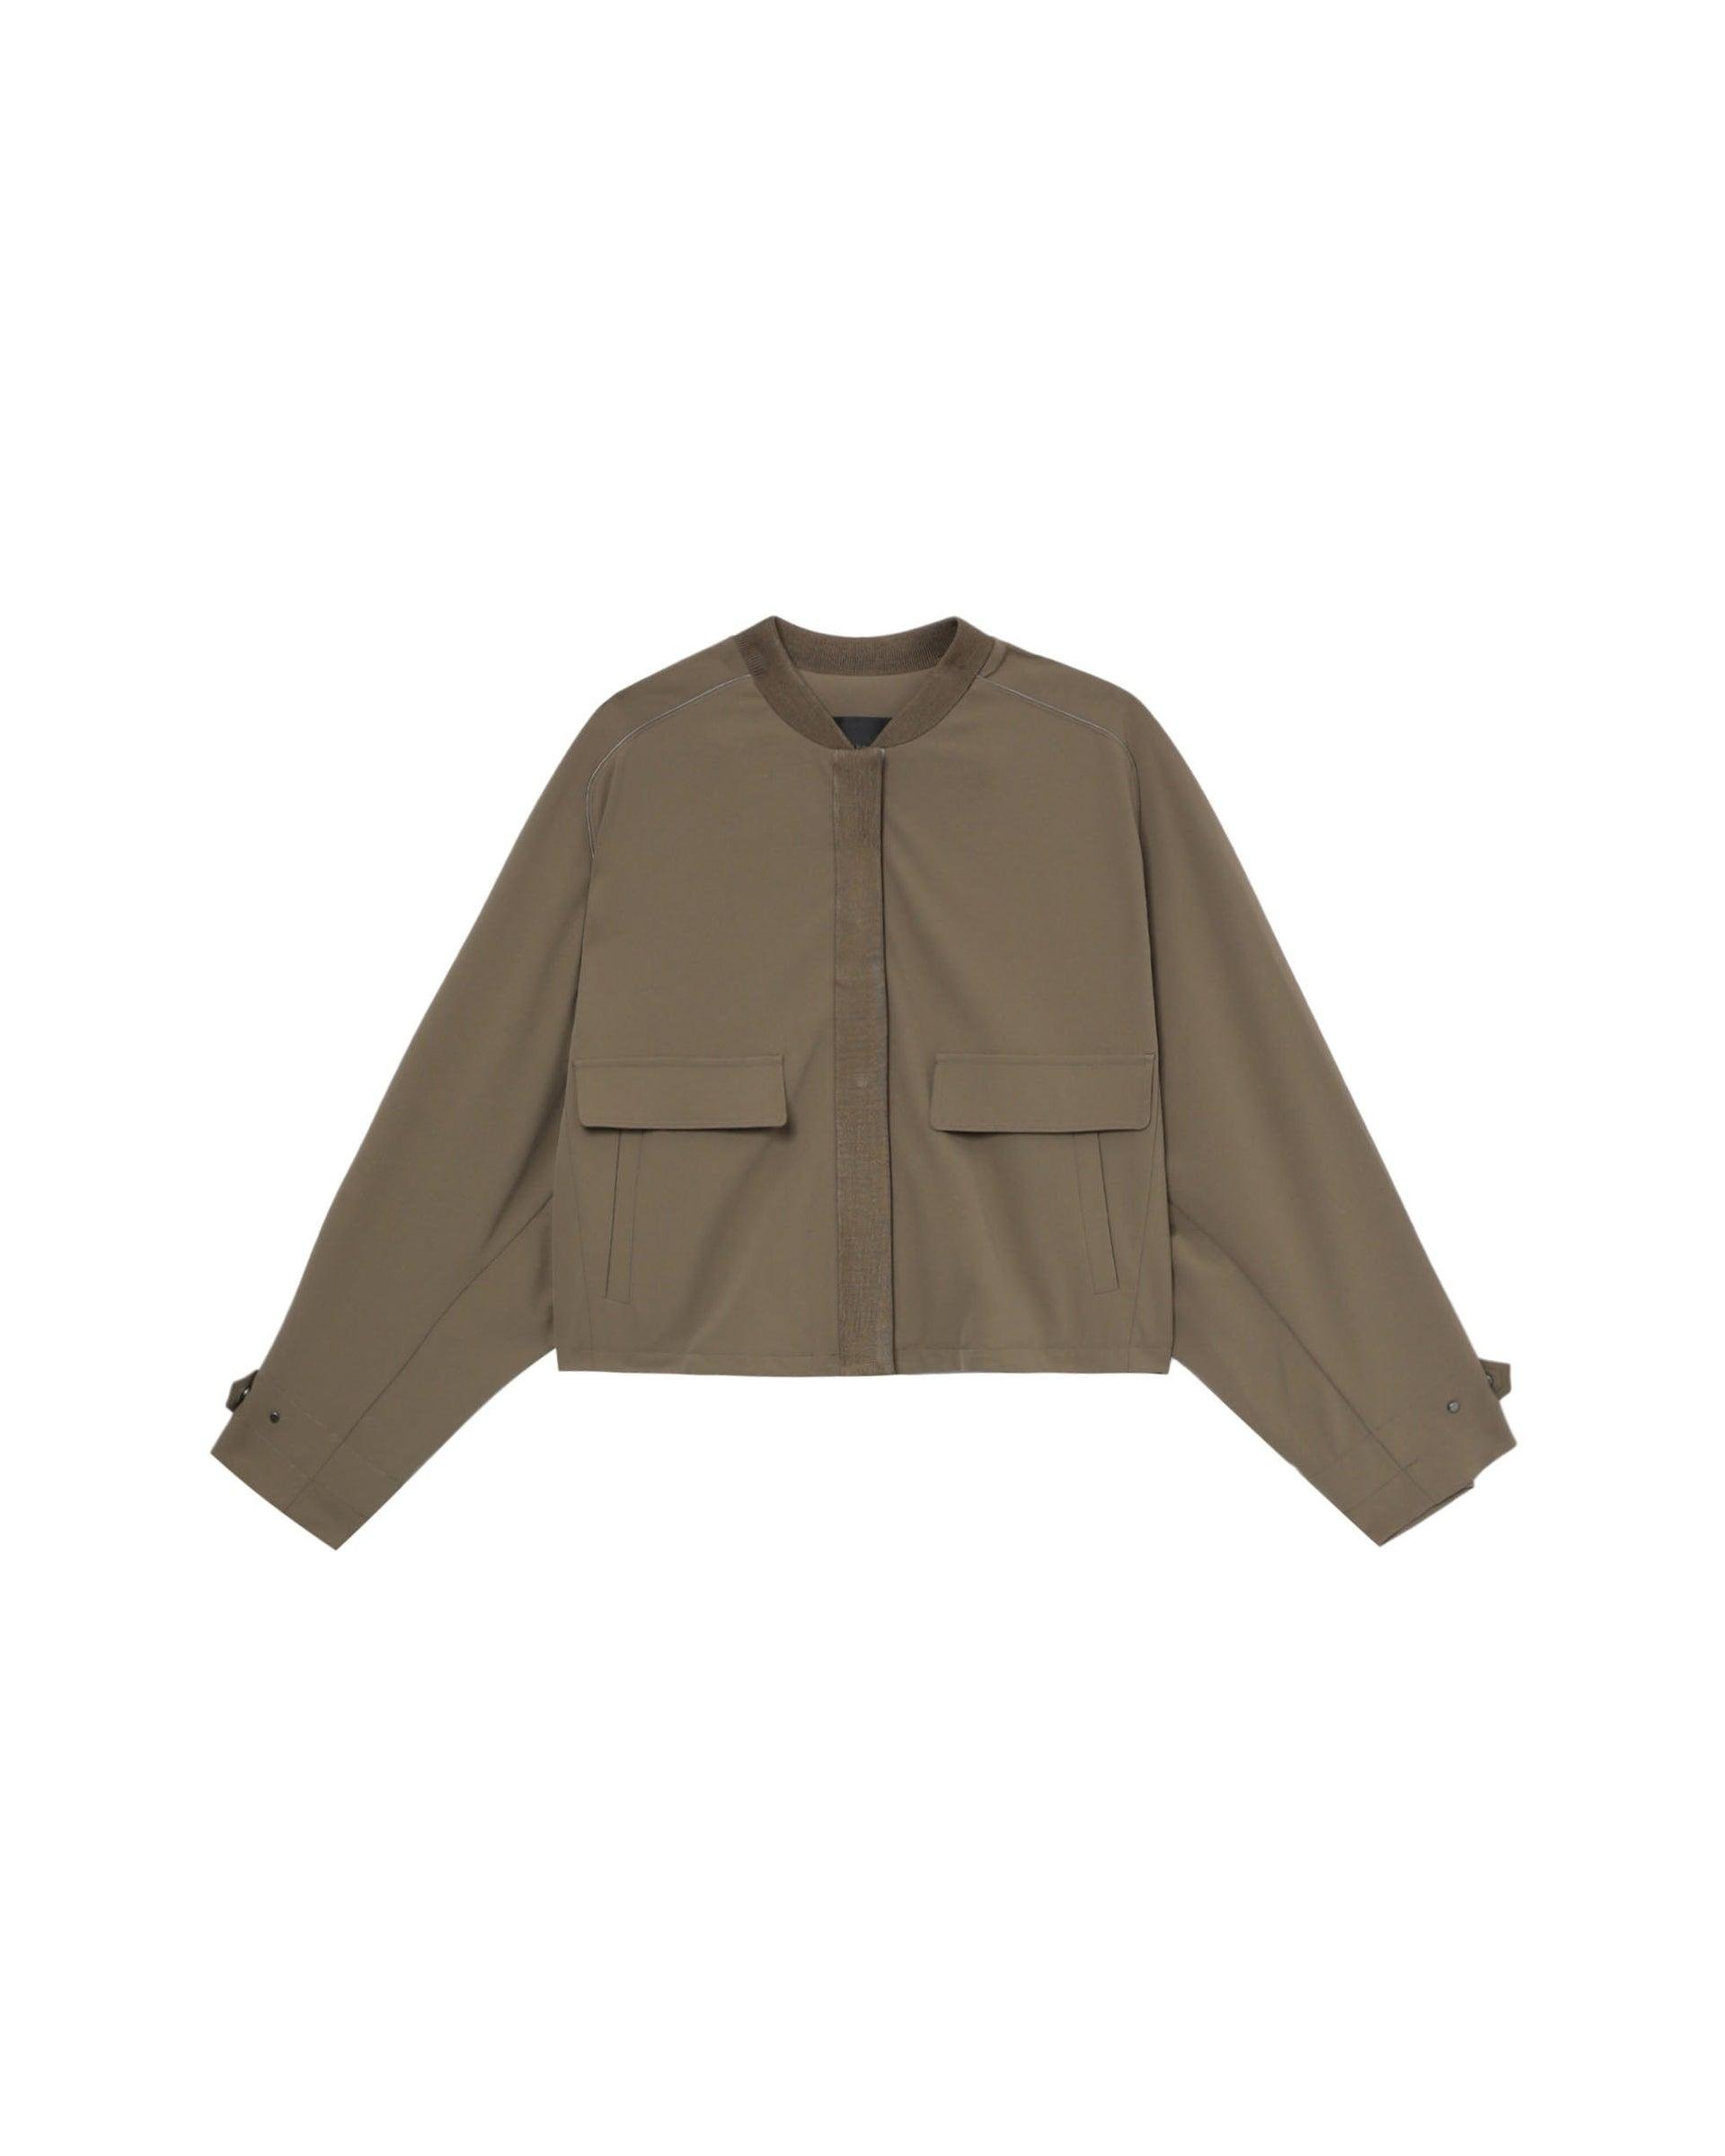 New Leisure Outer by ANTEPRIMA